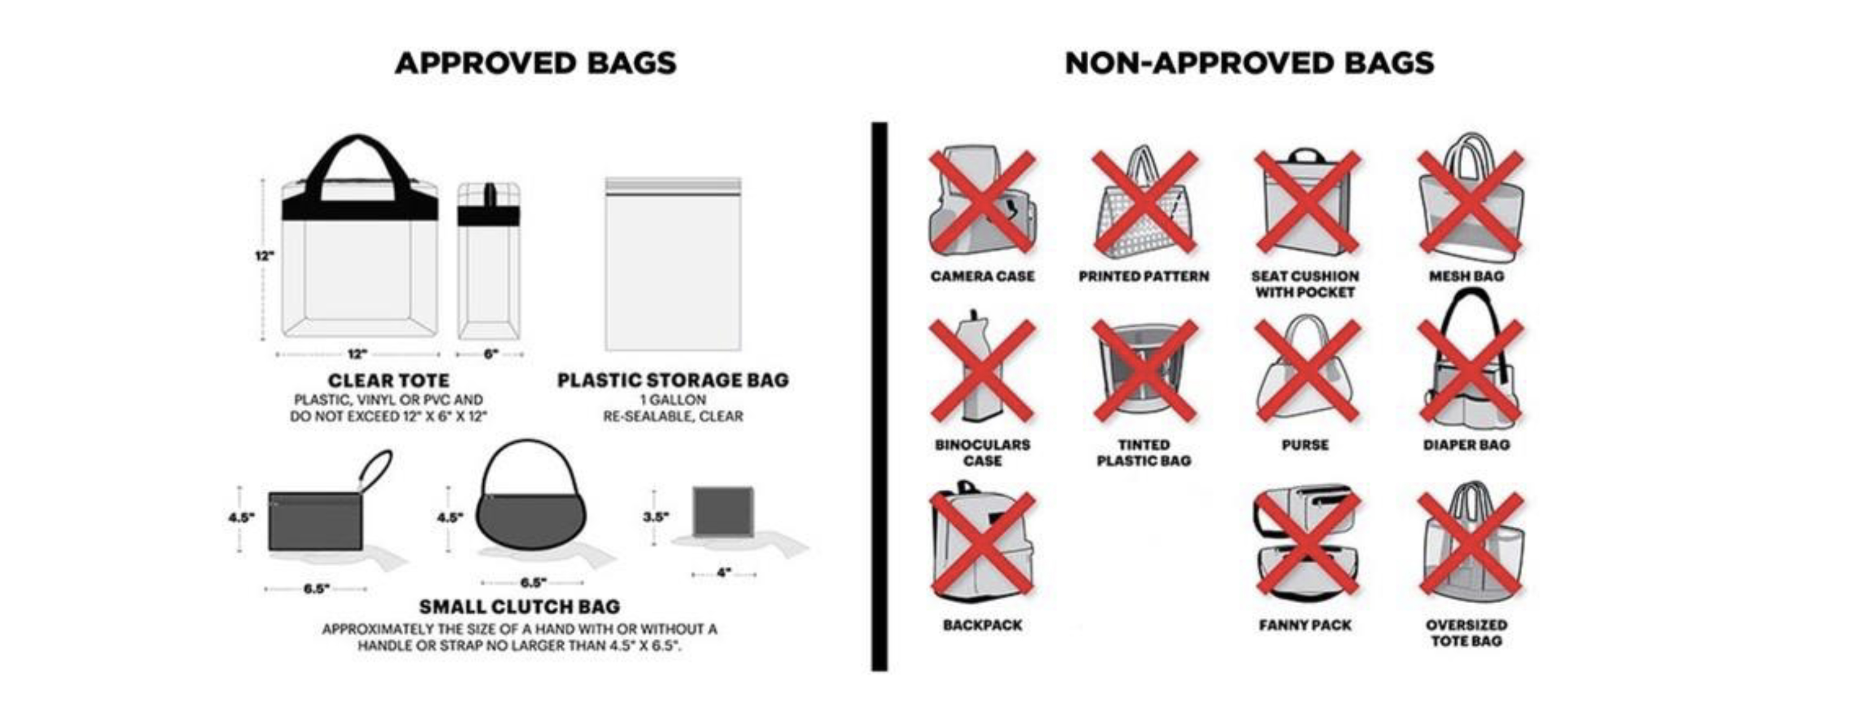 Approved and Non-Approved Bags